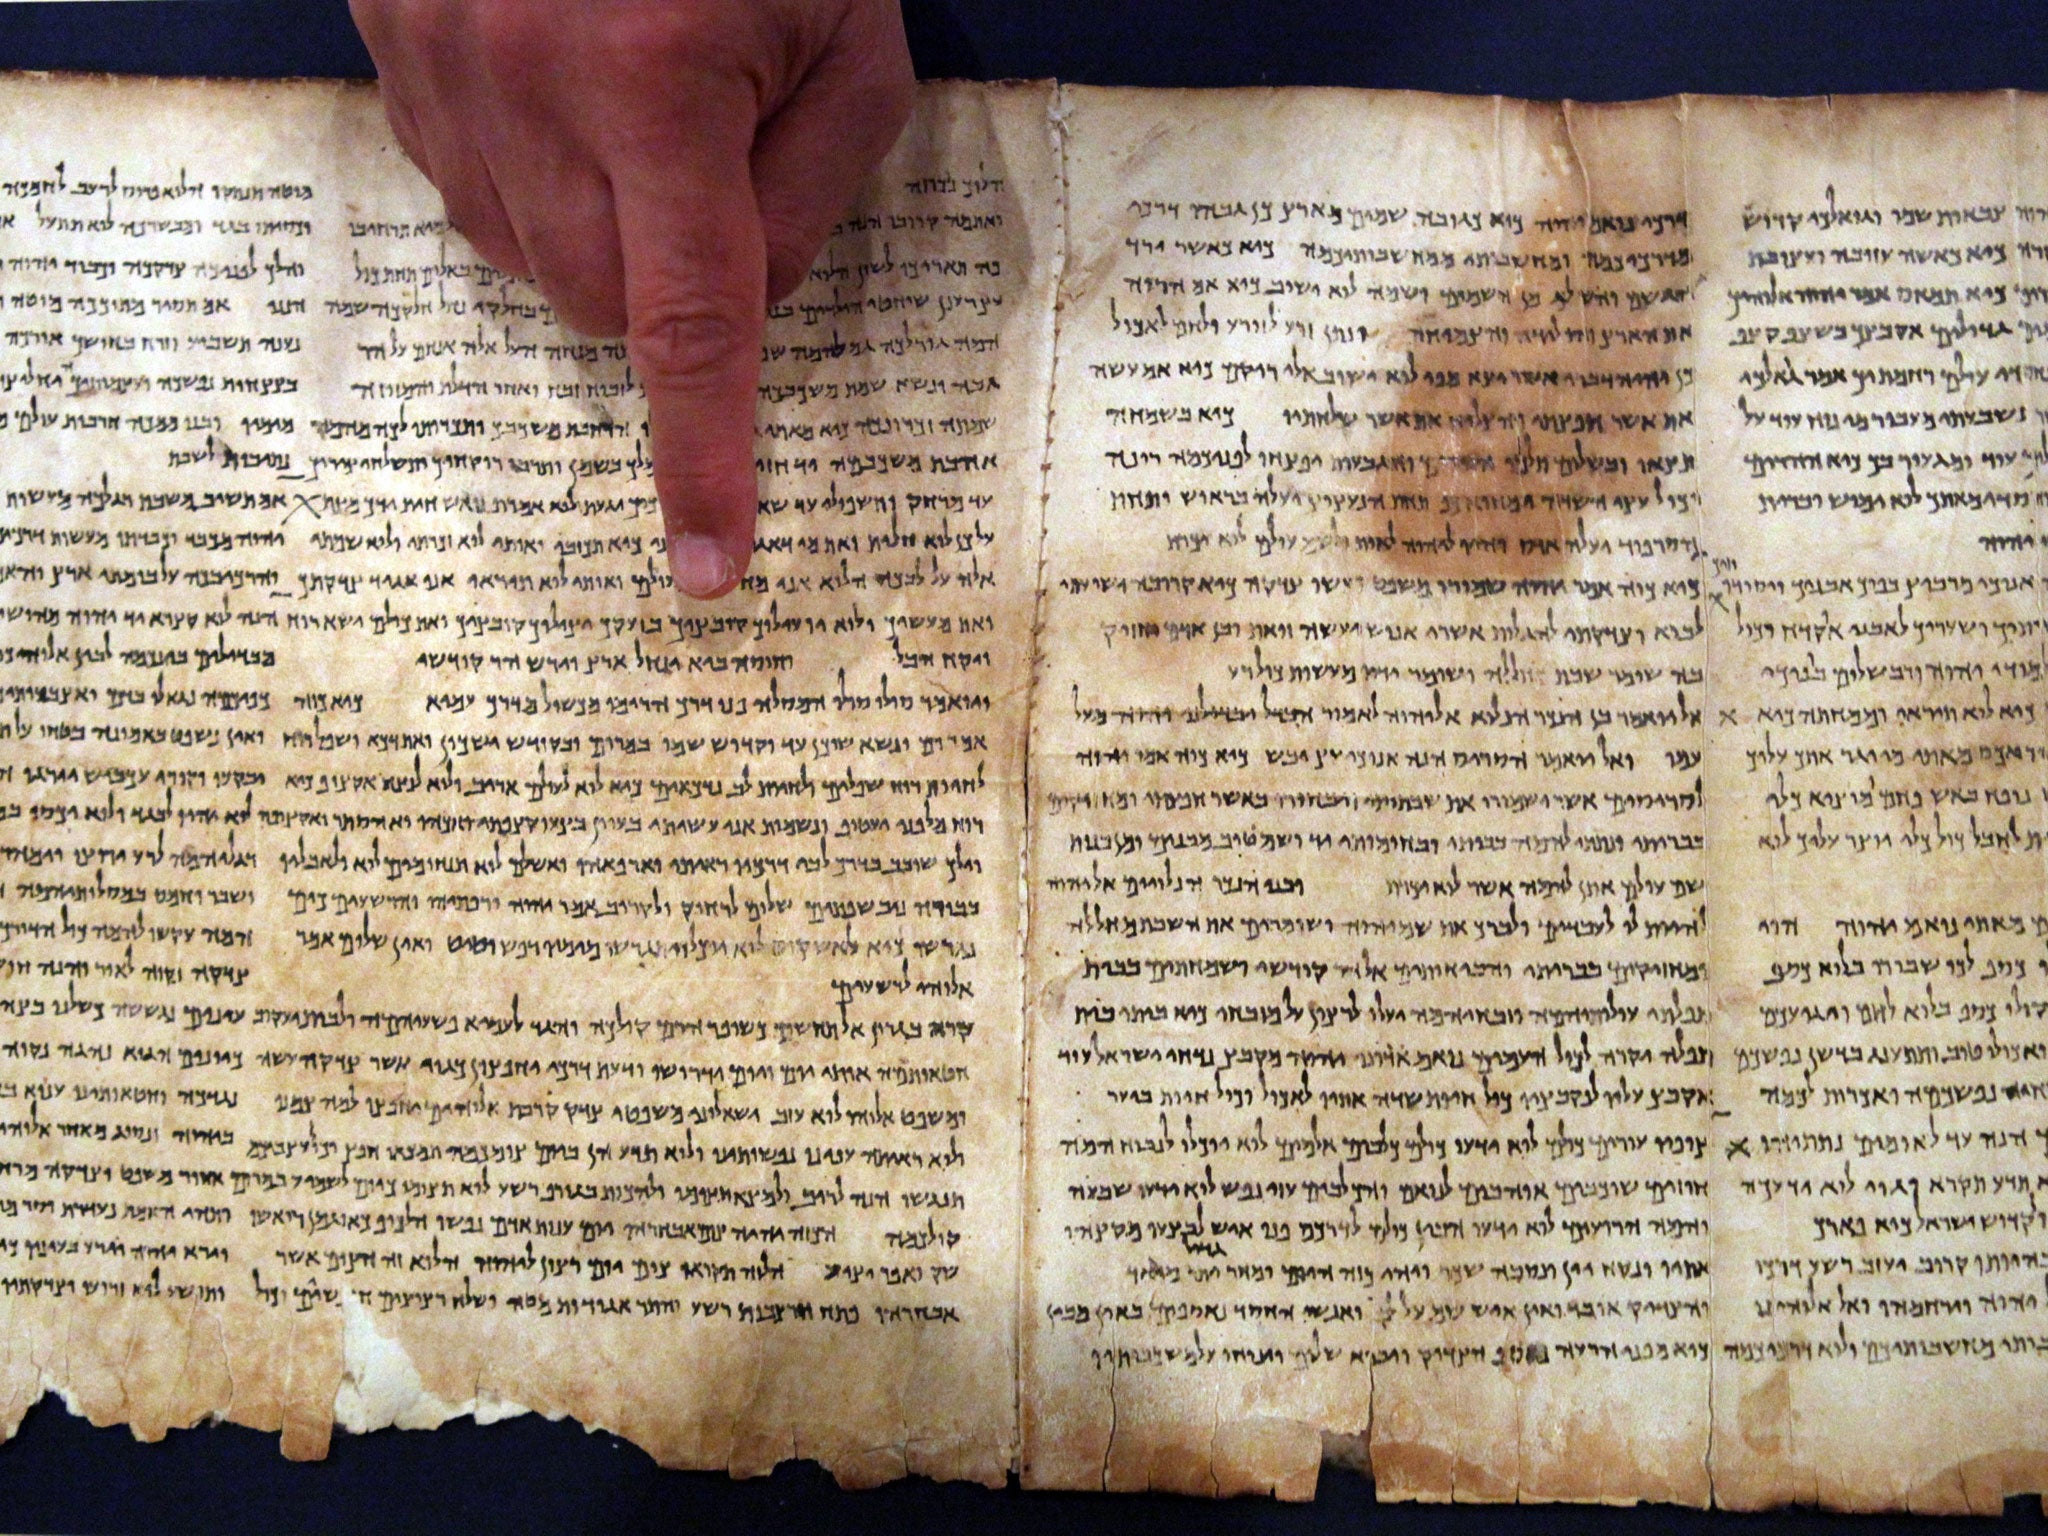 The Dead Sea Scrolls are almost 1,000 biblical manuscripts discovered in the decade after World War 2 in what is now the West Bank. The texts, mostly written on parchment but also on papyrus and bronze, are the earliest surviving copies of biblical and ex